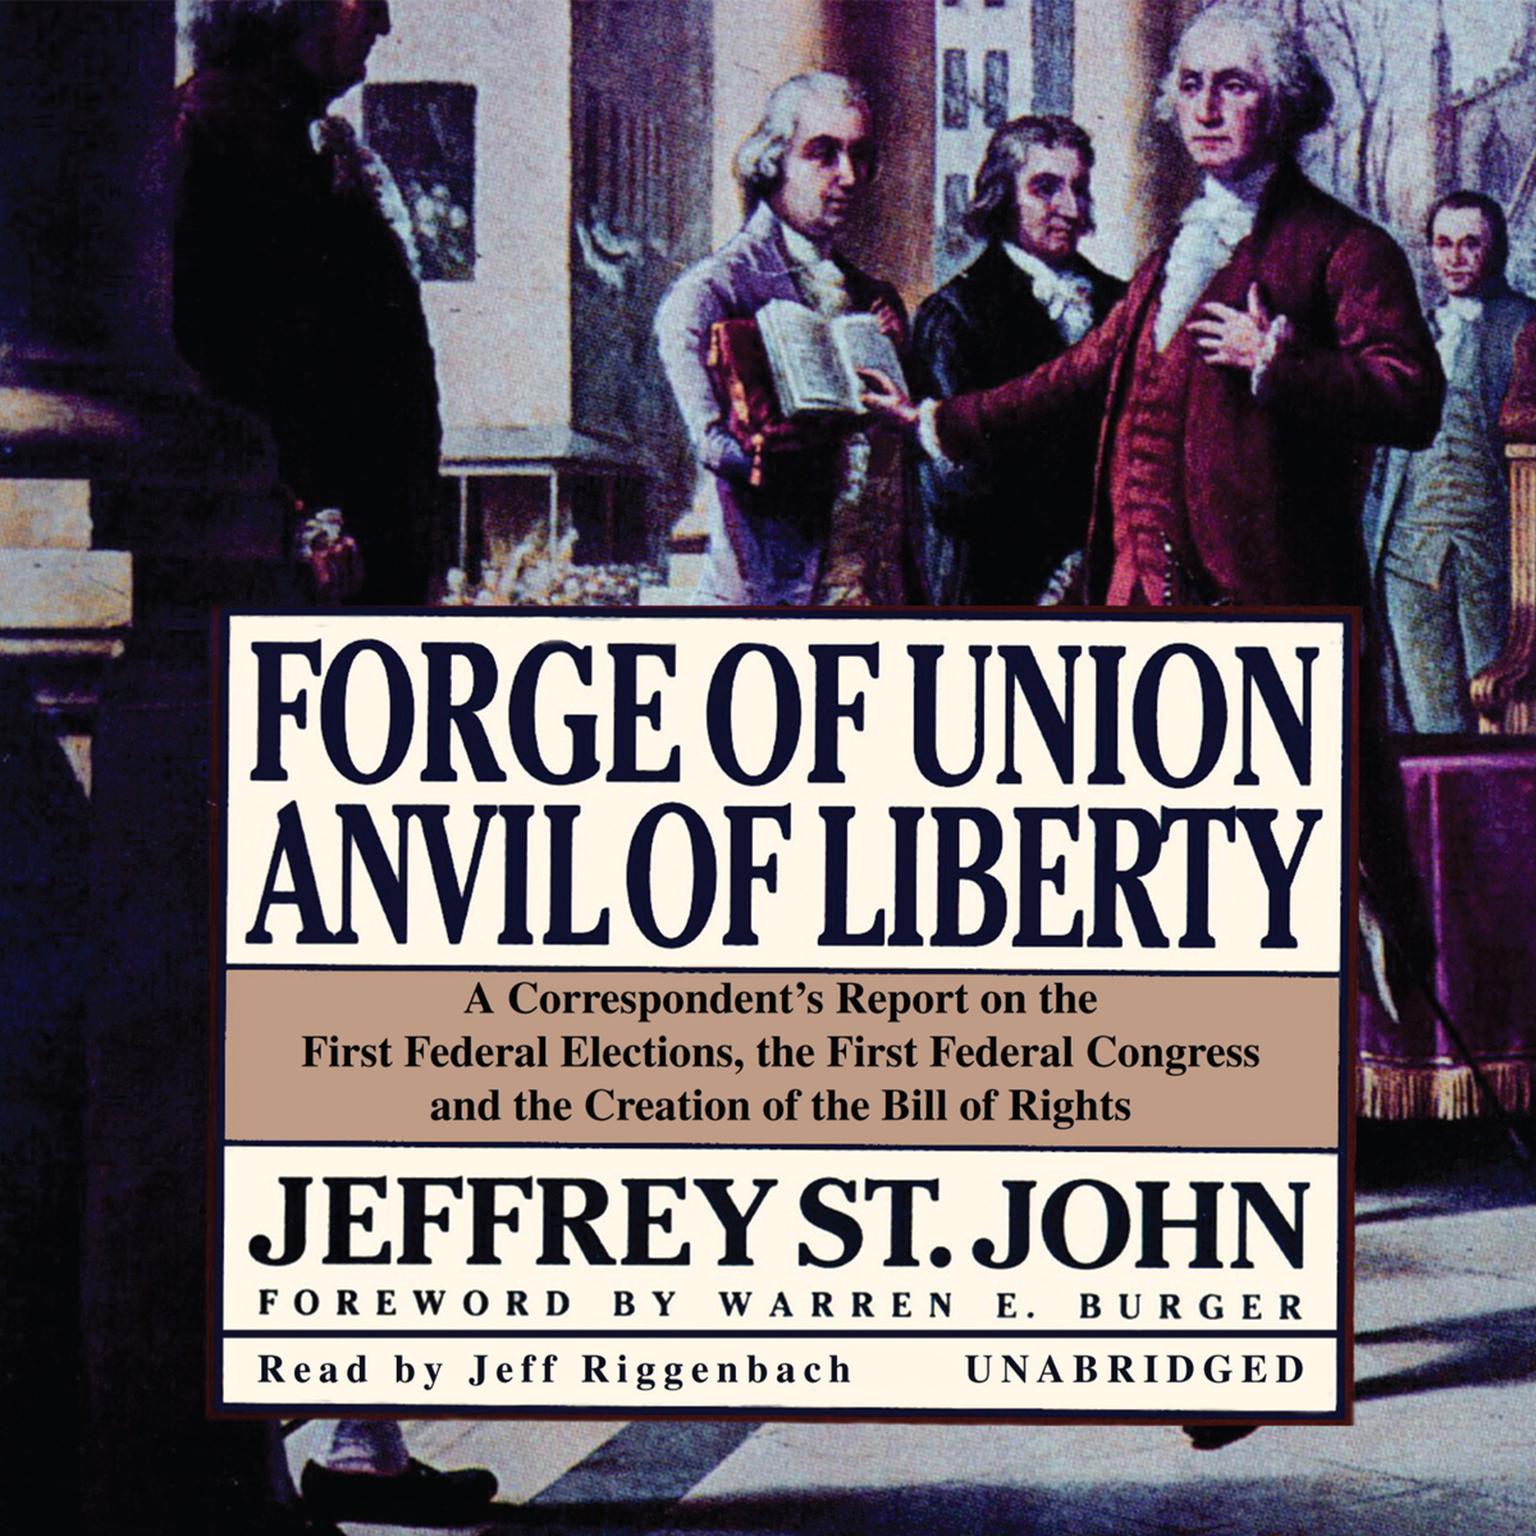 Forge of Union, Anvil of Liberty: A Correspondent’s Report on the First Federal Elections, the First Federal Congress, and the Bill of Rights Audiobook, by Jeffrey St. John